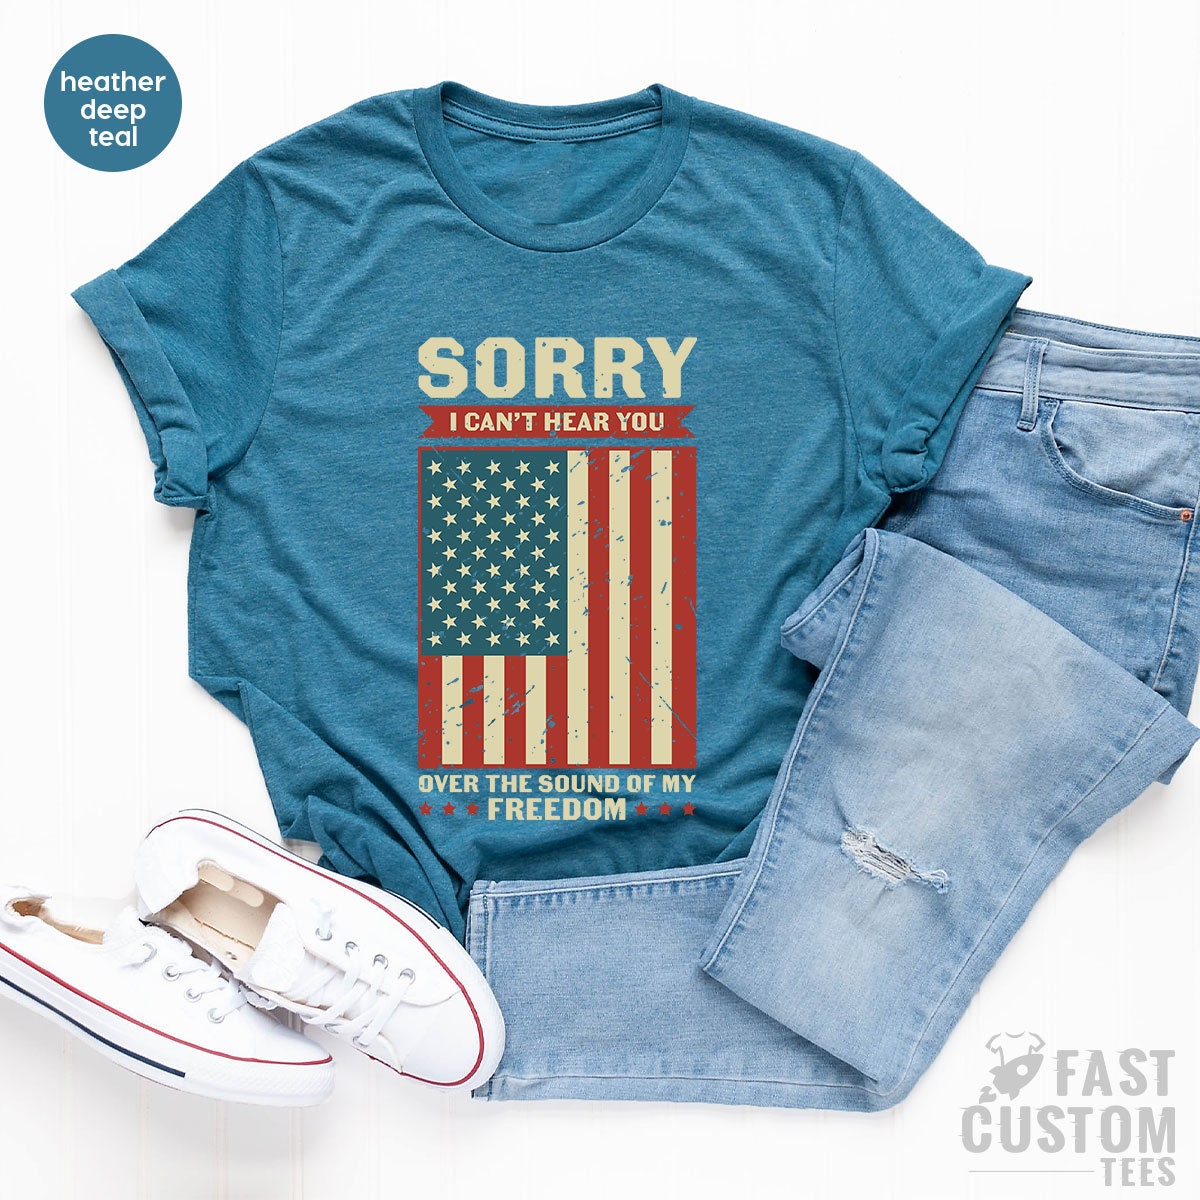 Patriotic Shirt, Sorry I Can't Hear You Over The Sound Of My Freedom, Independence T-Shirt, American Flag Shirt, USA Shirt, Patriot Shirt - Fastdeliverytees.com